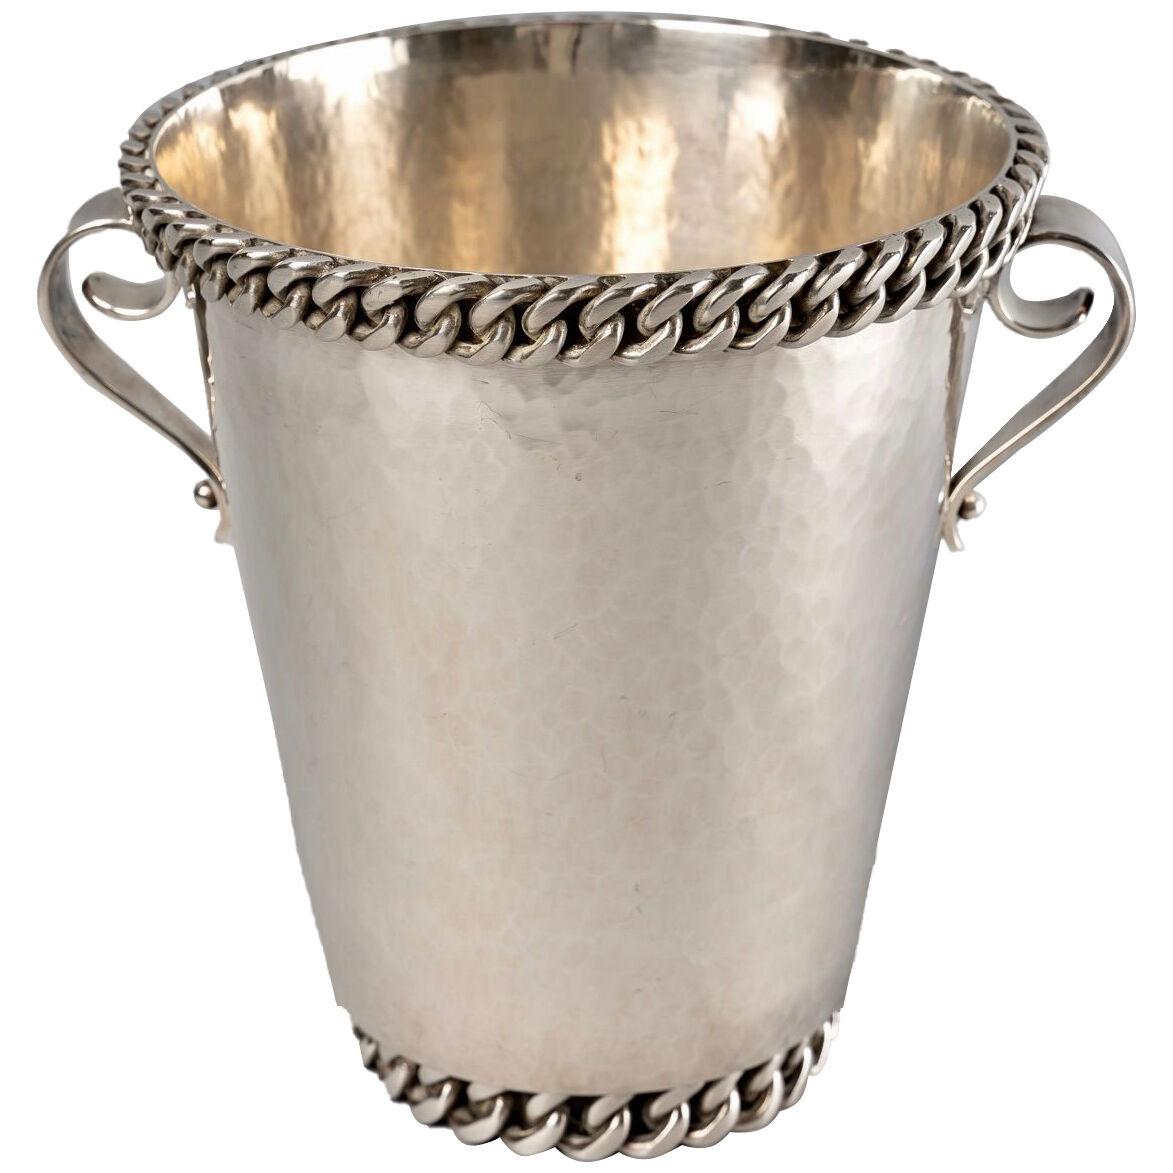 Jean Desprès - Champagne Ice Bucket Art Deco Hammered Silver Plated Metal